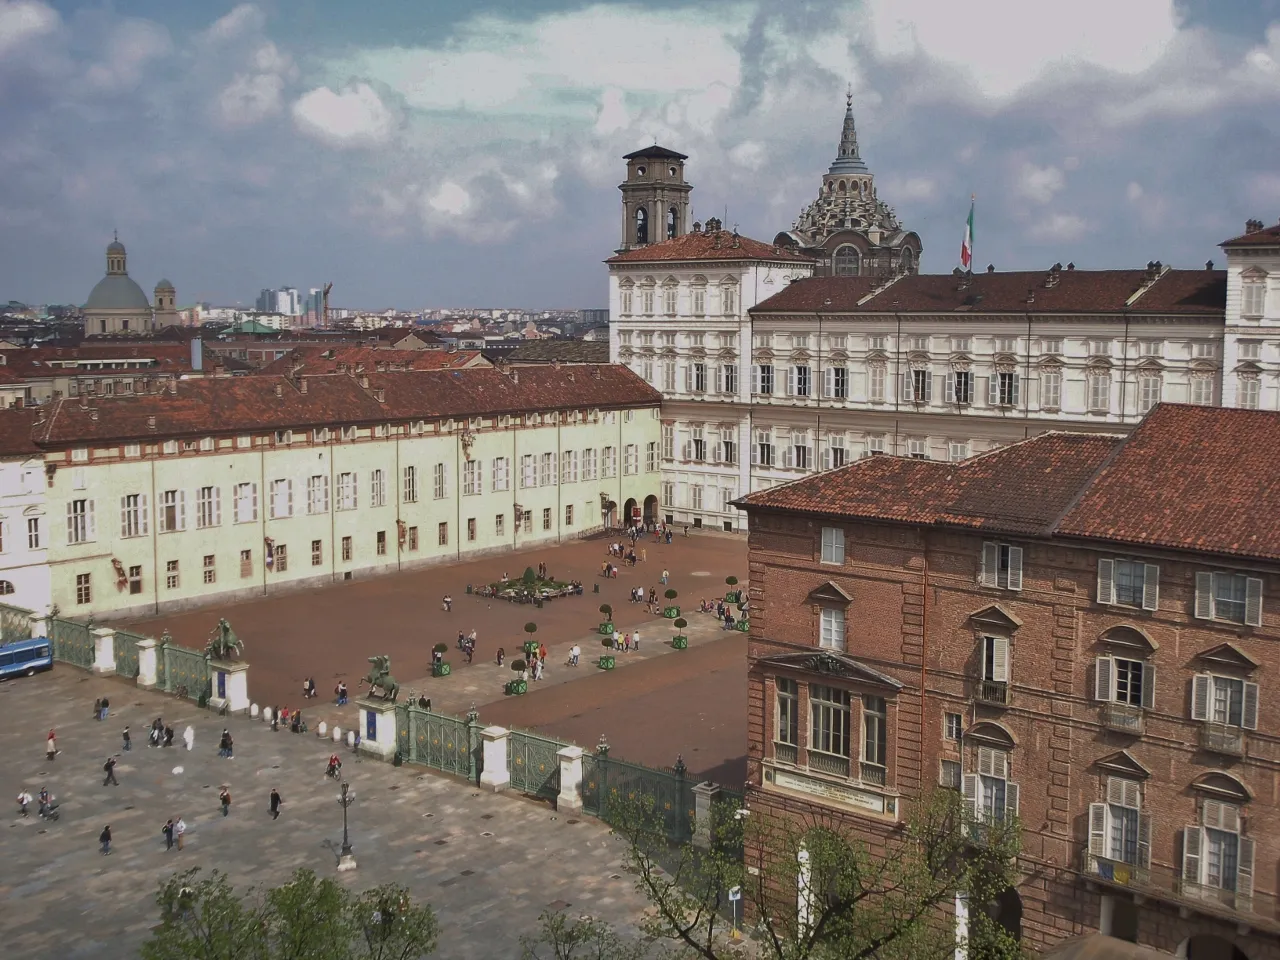 Photo showing: Royal Palace of Turin or Palazzo Reale, is a palace in Turin, northern Italy. It was the royal palace of the House of Savoy. It was modernised greatly by the French born Madama Reale Christine Marie of France (1606–1663) in the 17th century.